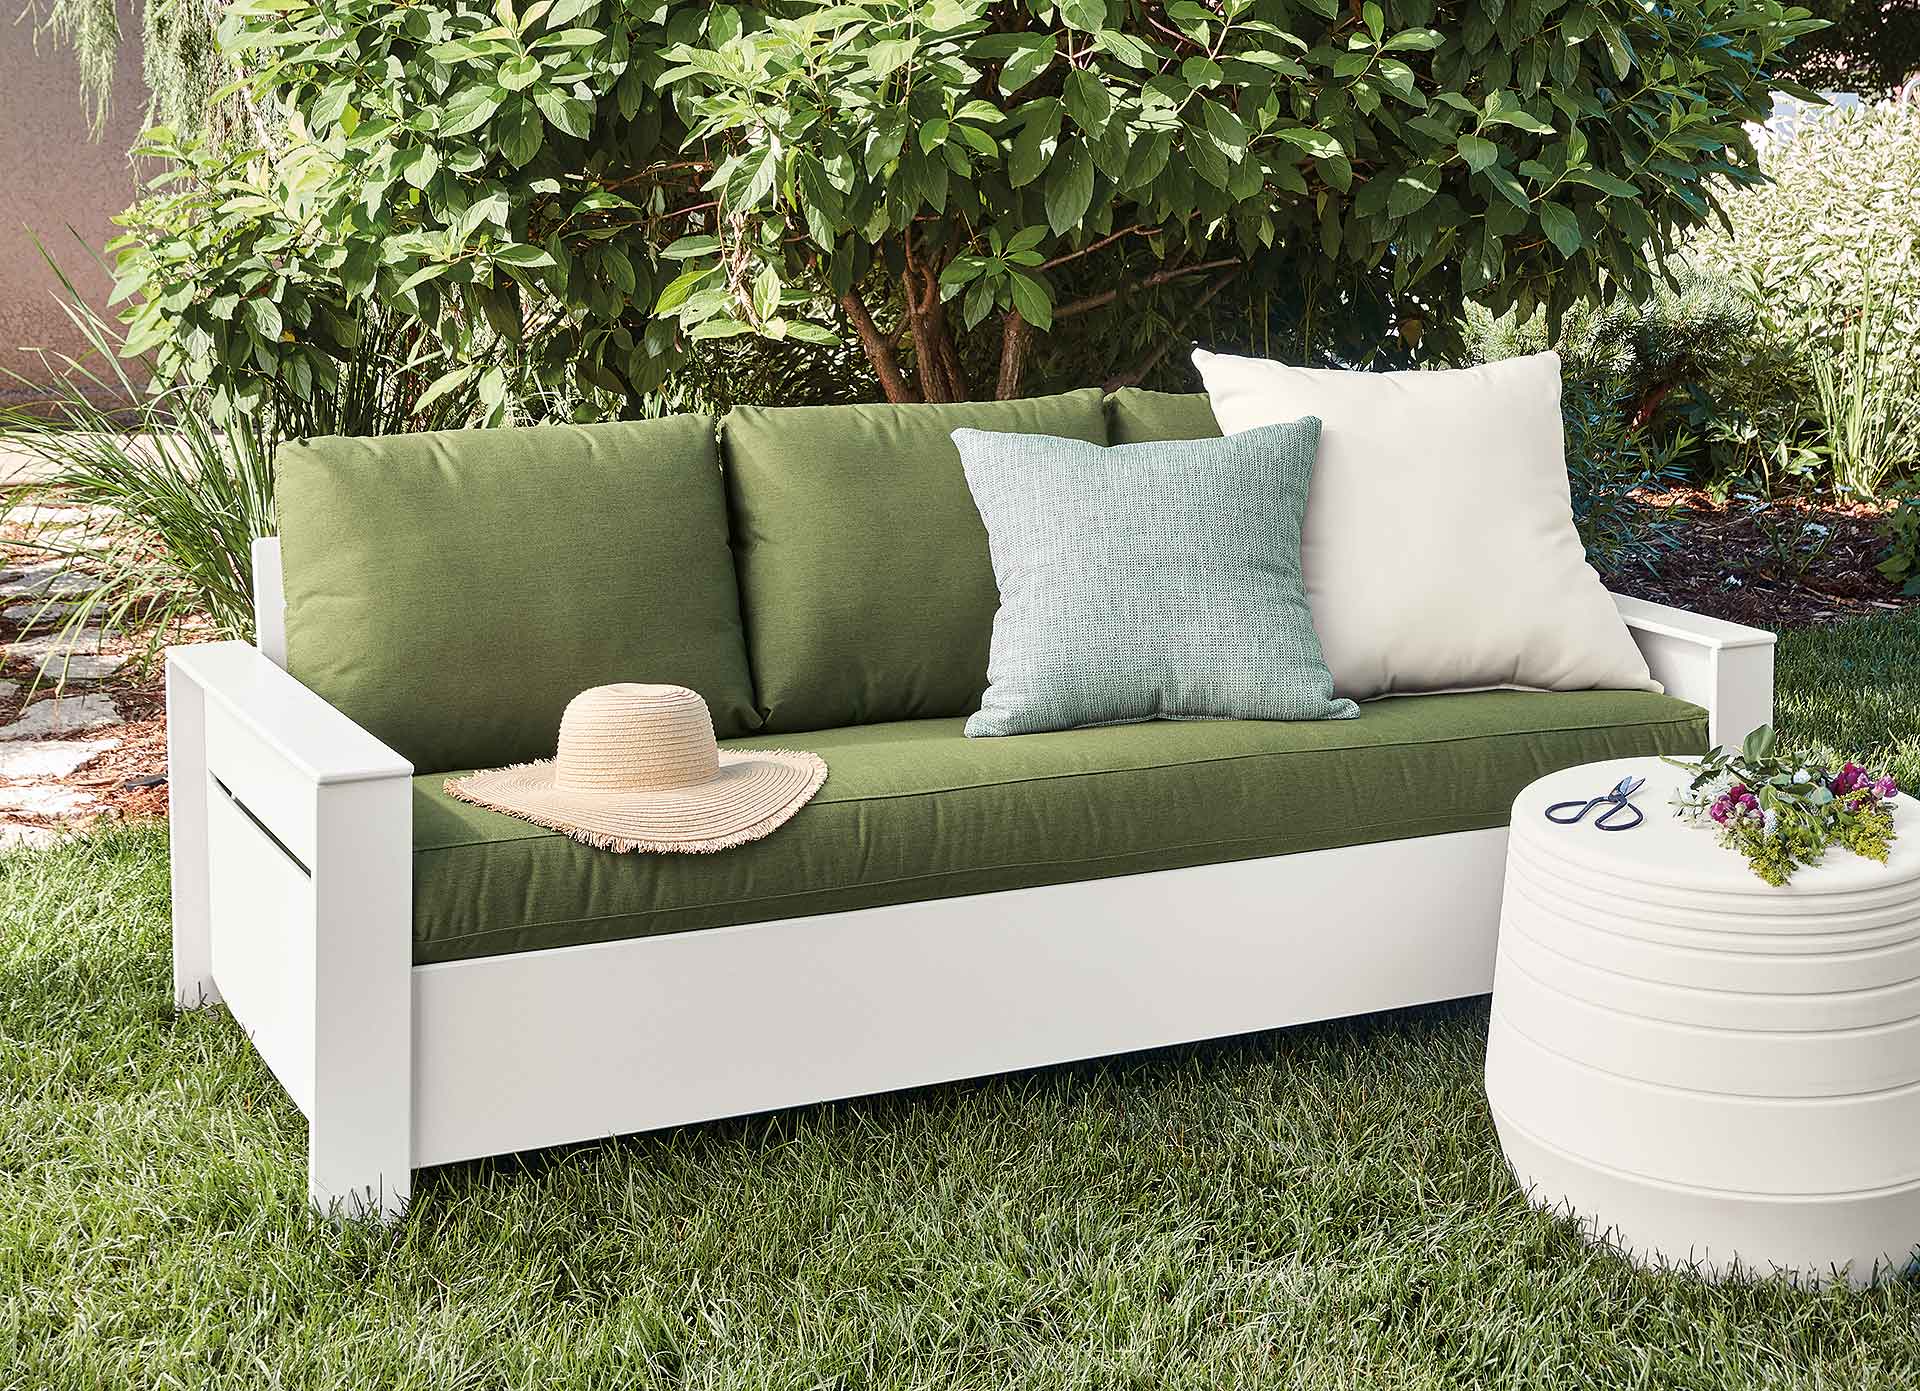 green and white outdoor sofa in lawn